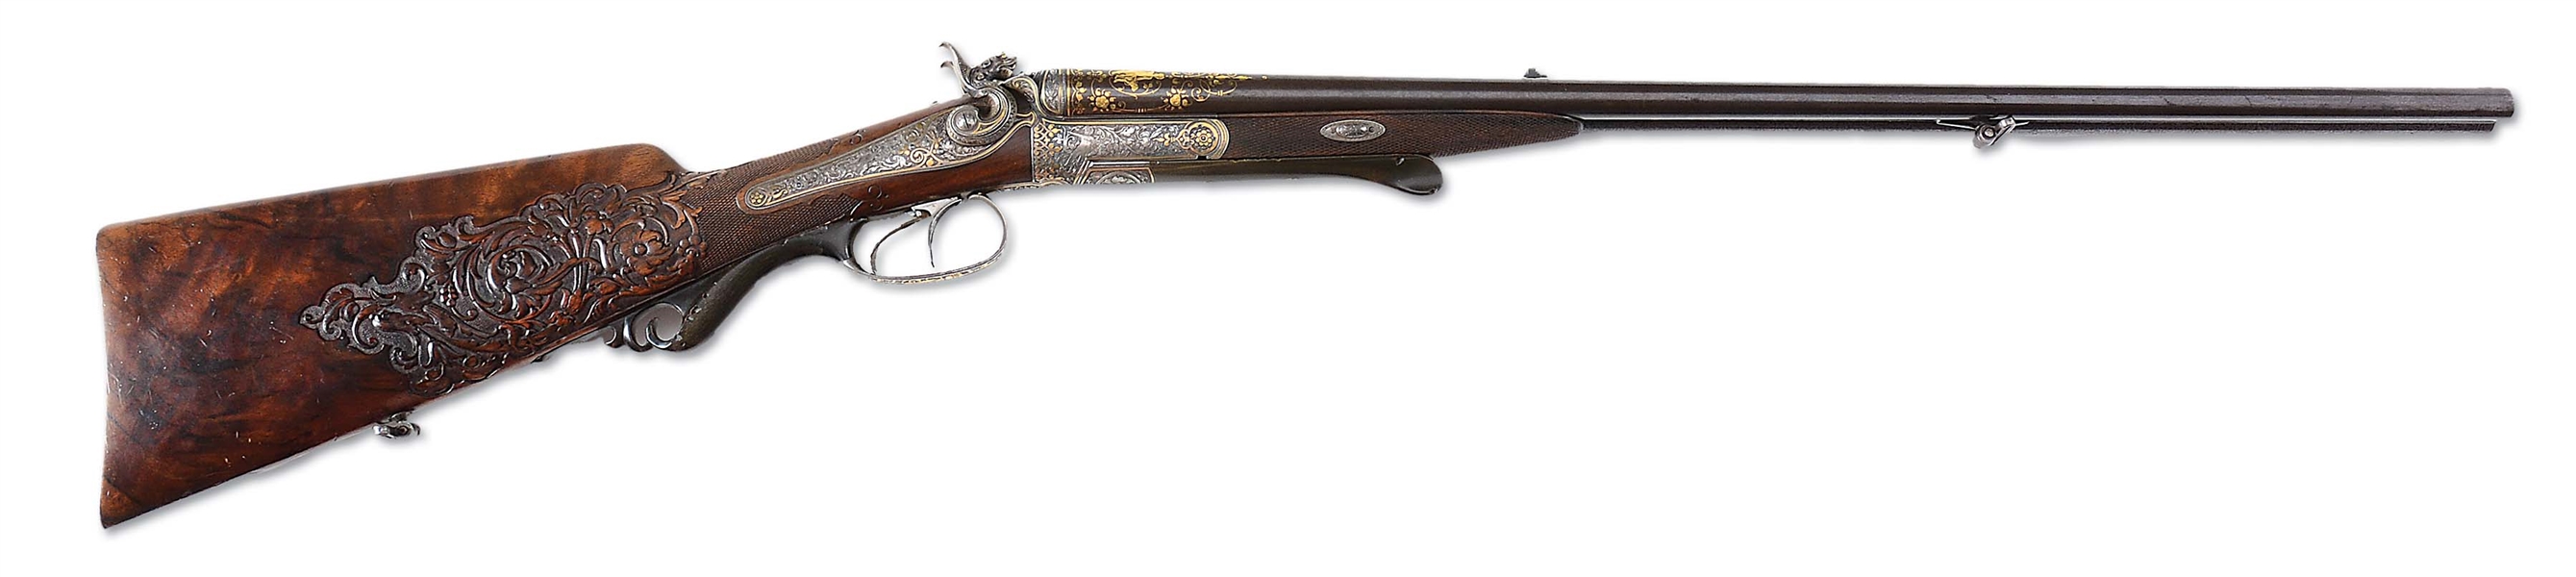 (A) GOLD INLAID AND CARVED MILLER & VAL GREISS COMBINATION HAMMER RIFLE/ SHOTGUN MOST LIKELY MADE FOR LUITPOLD, PRINCE REGENT OF BAVARIA